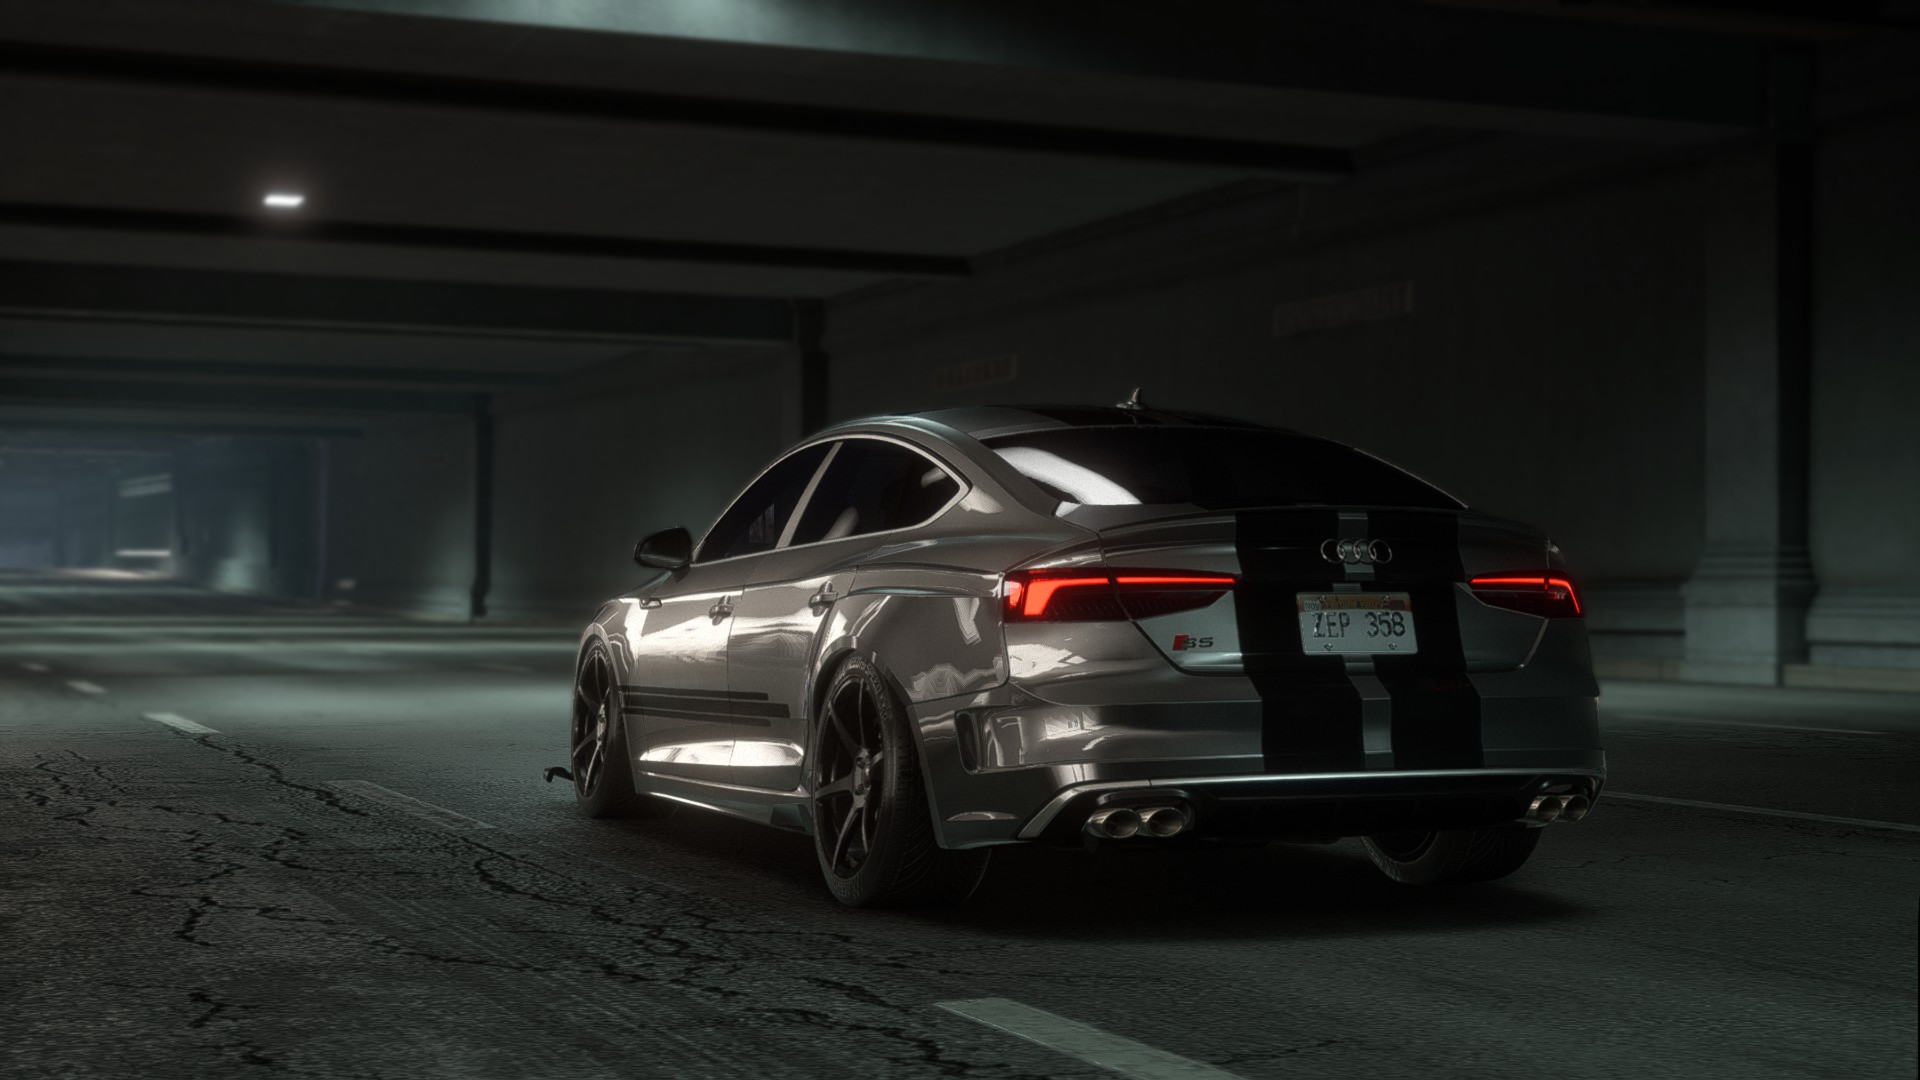 Need For Speed Need For Speed Payback Screen Shot Audi S5 1920x1080